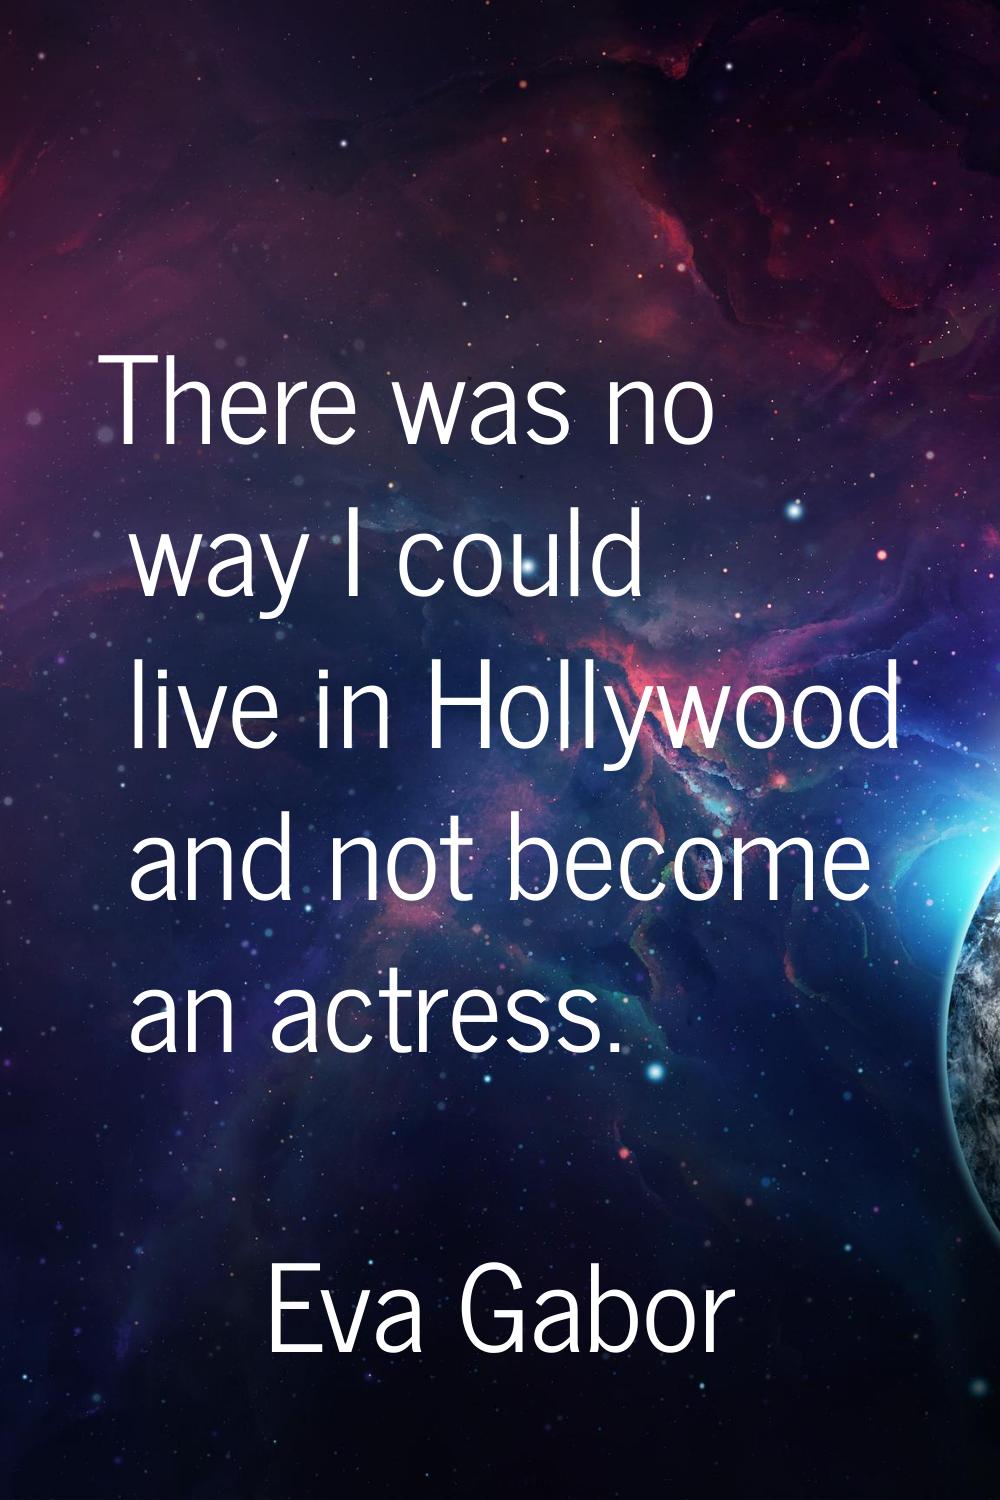 There was no way I could live in Hollywood and not become an actress.